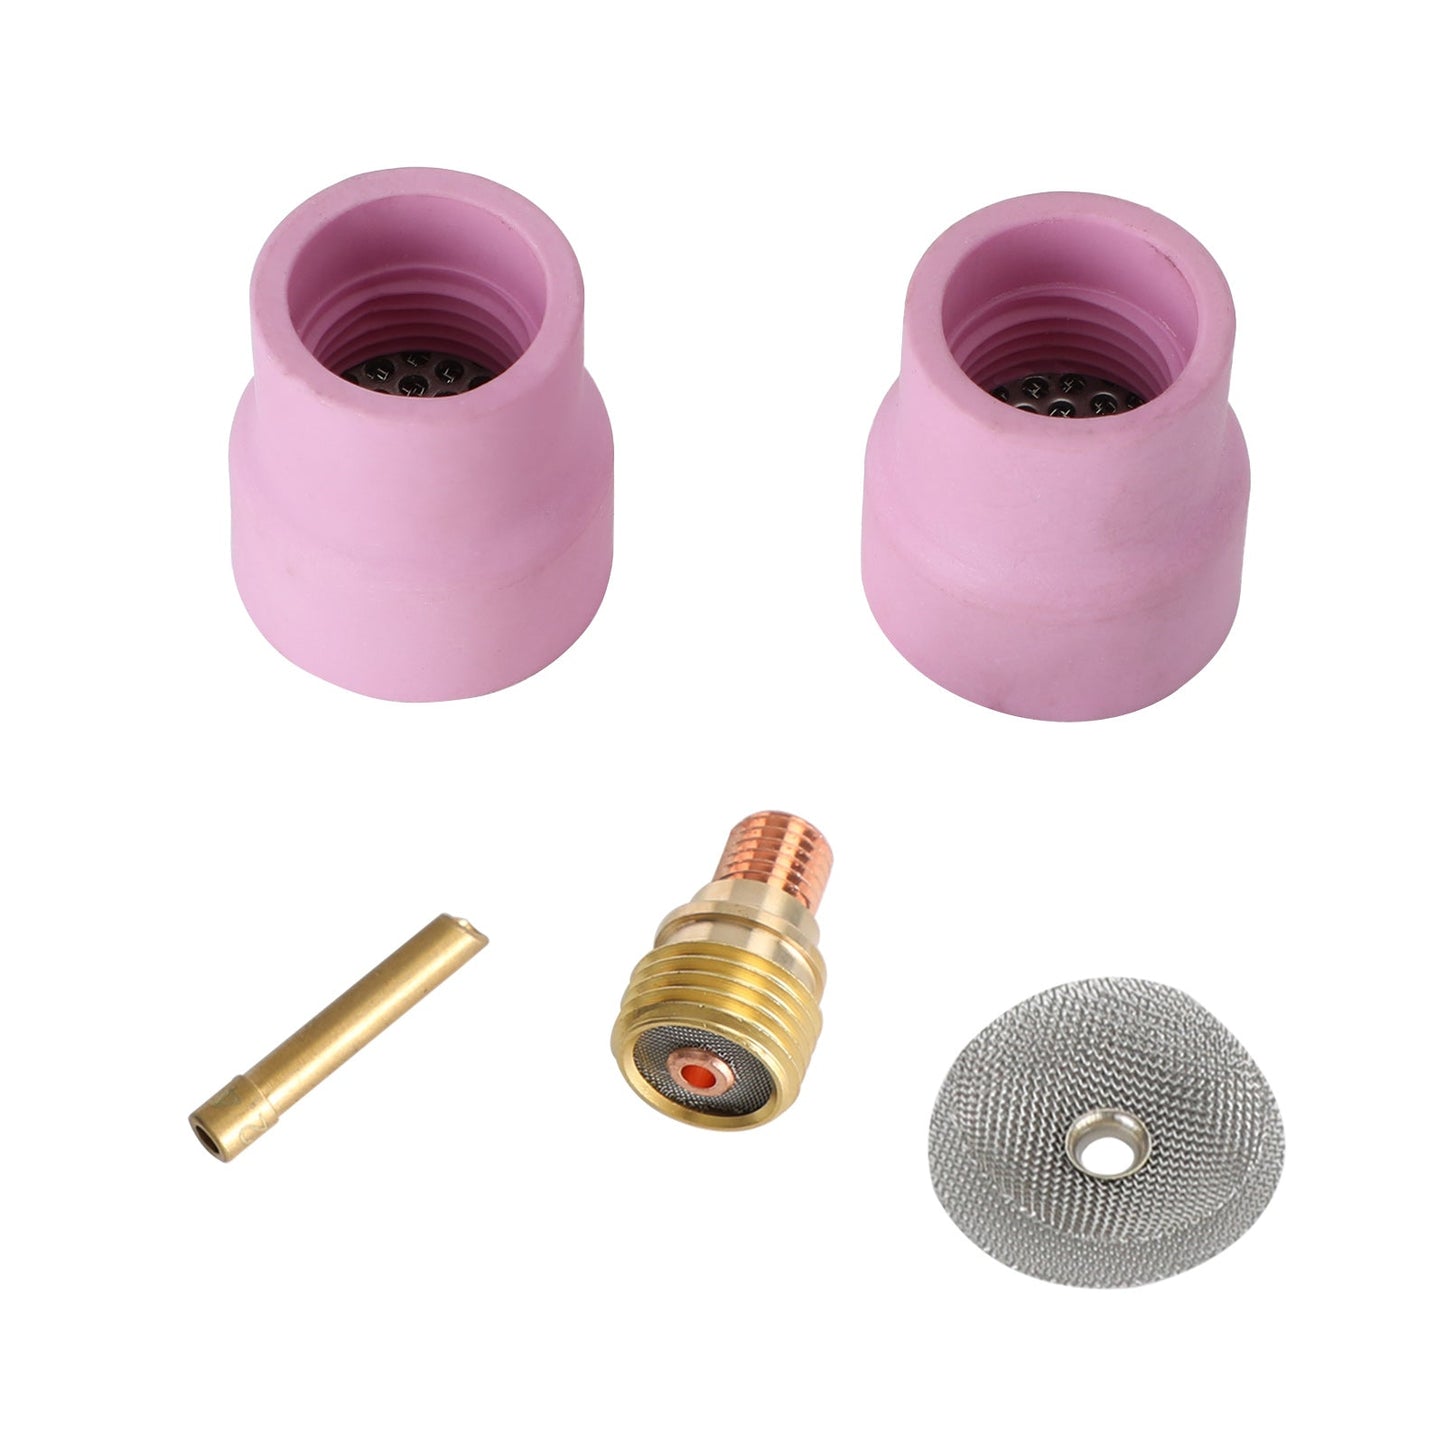 #12 Ceramic Glass Cup Complete Kit For Wp-9 20 & 25 Series Tig Torches